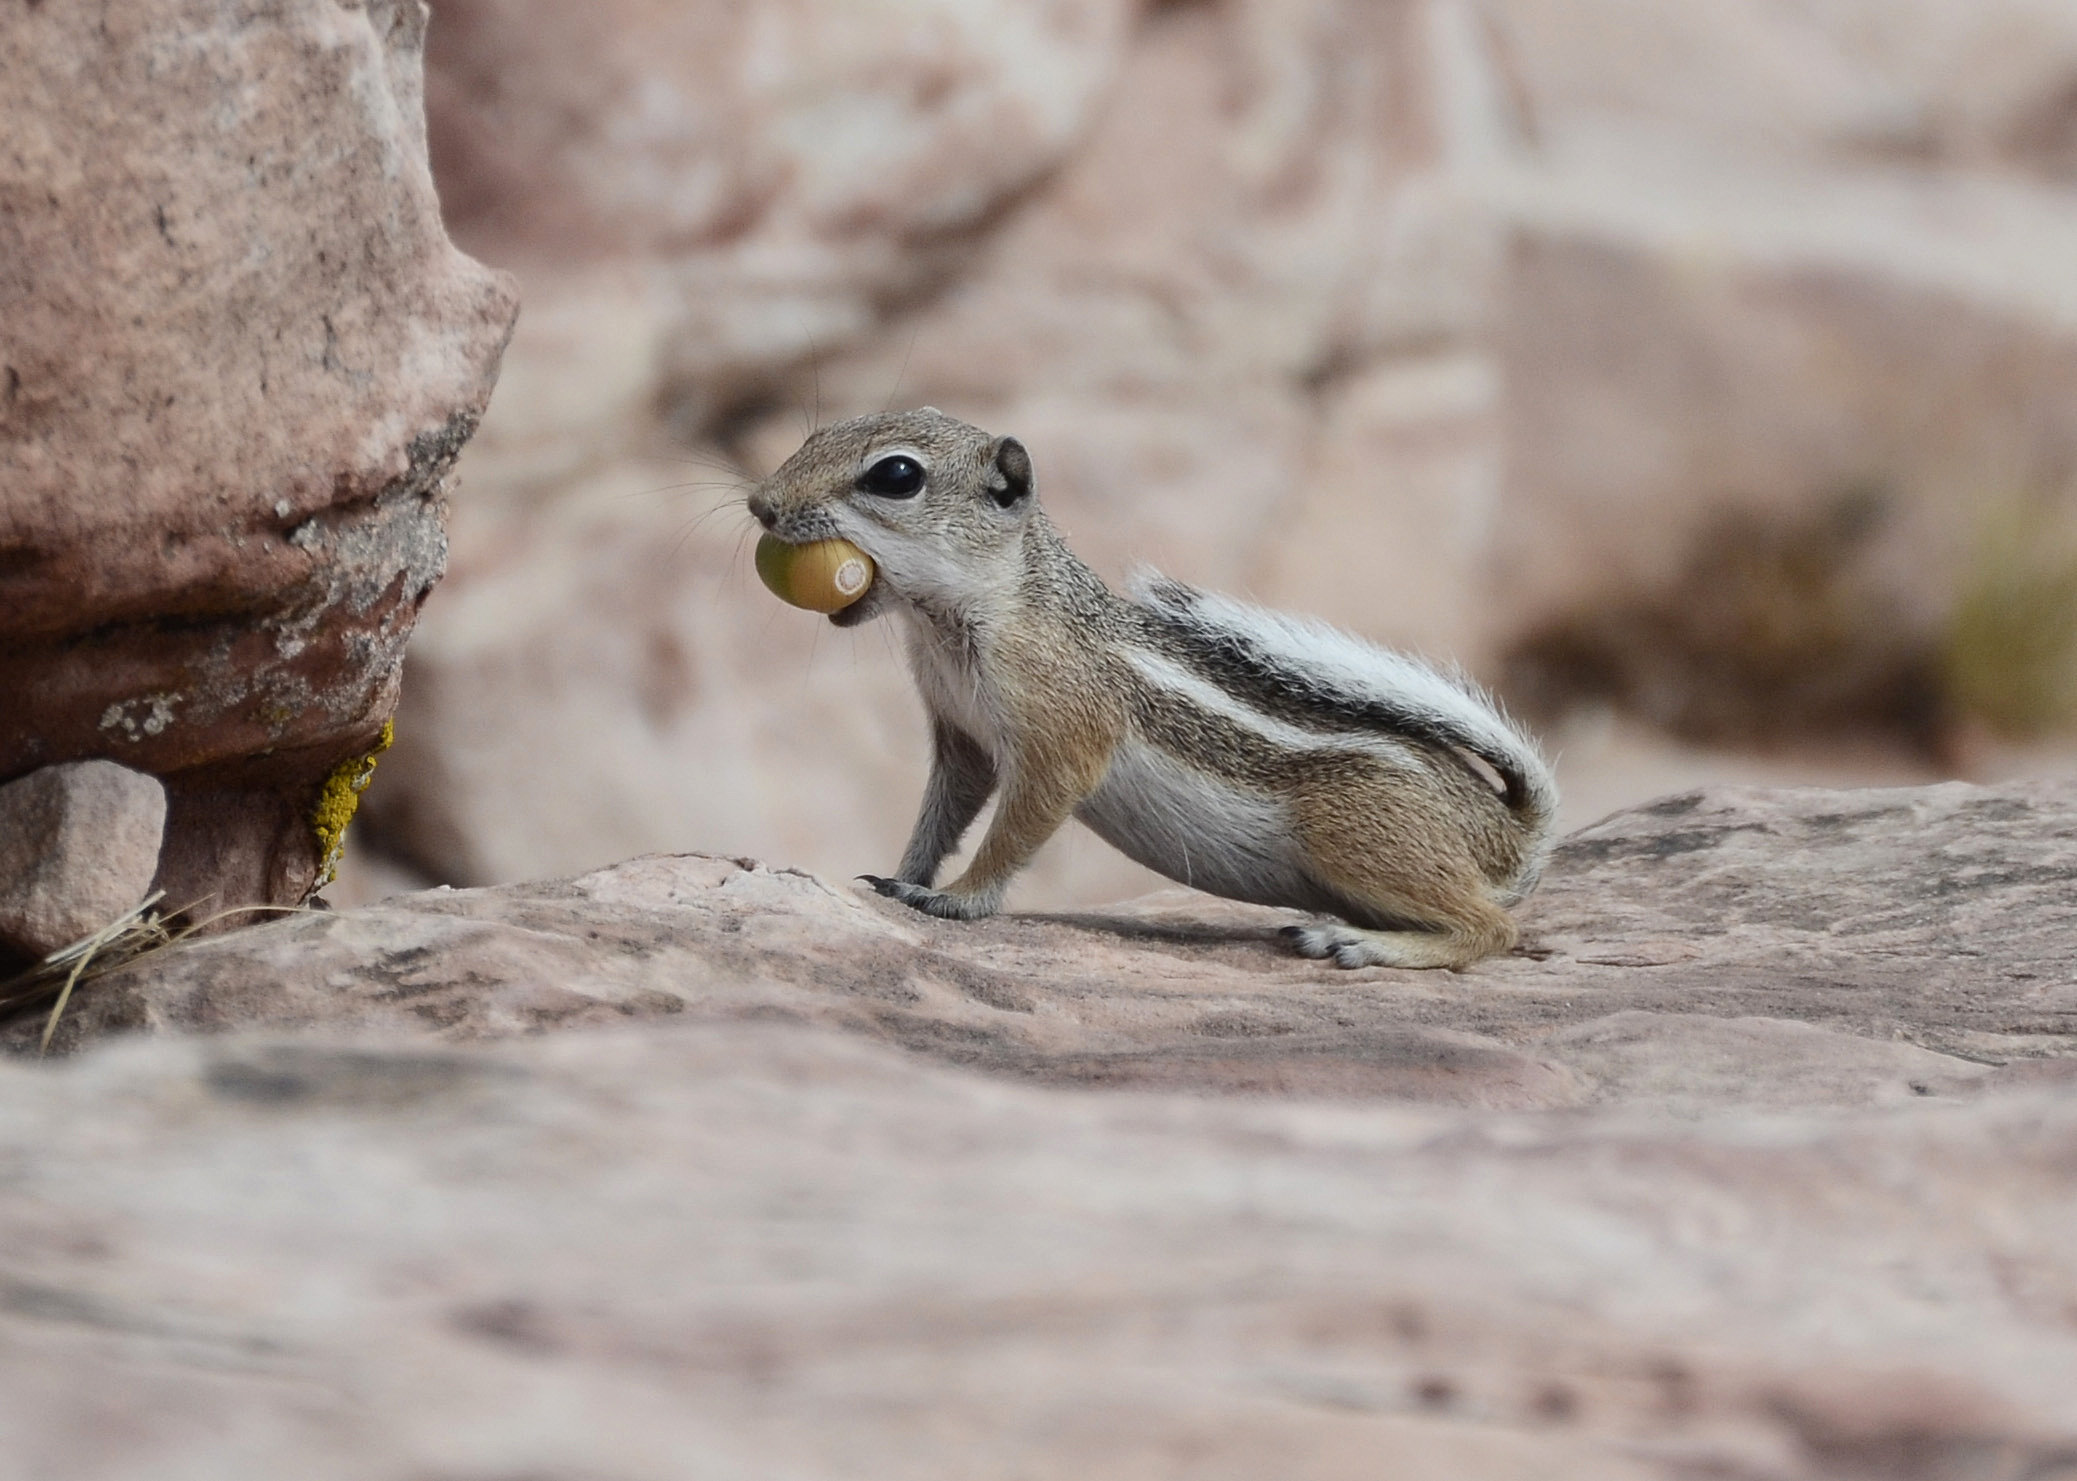 File:White-tailed Antelope Squirrel DSC4931aavv.jpg - Wikimedia Commons